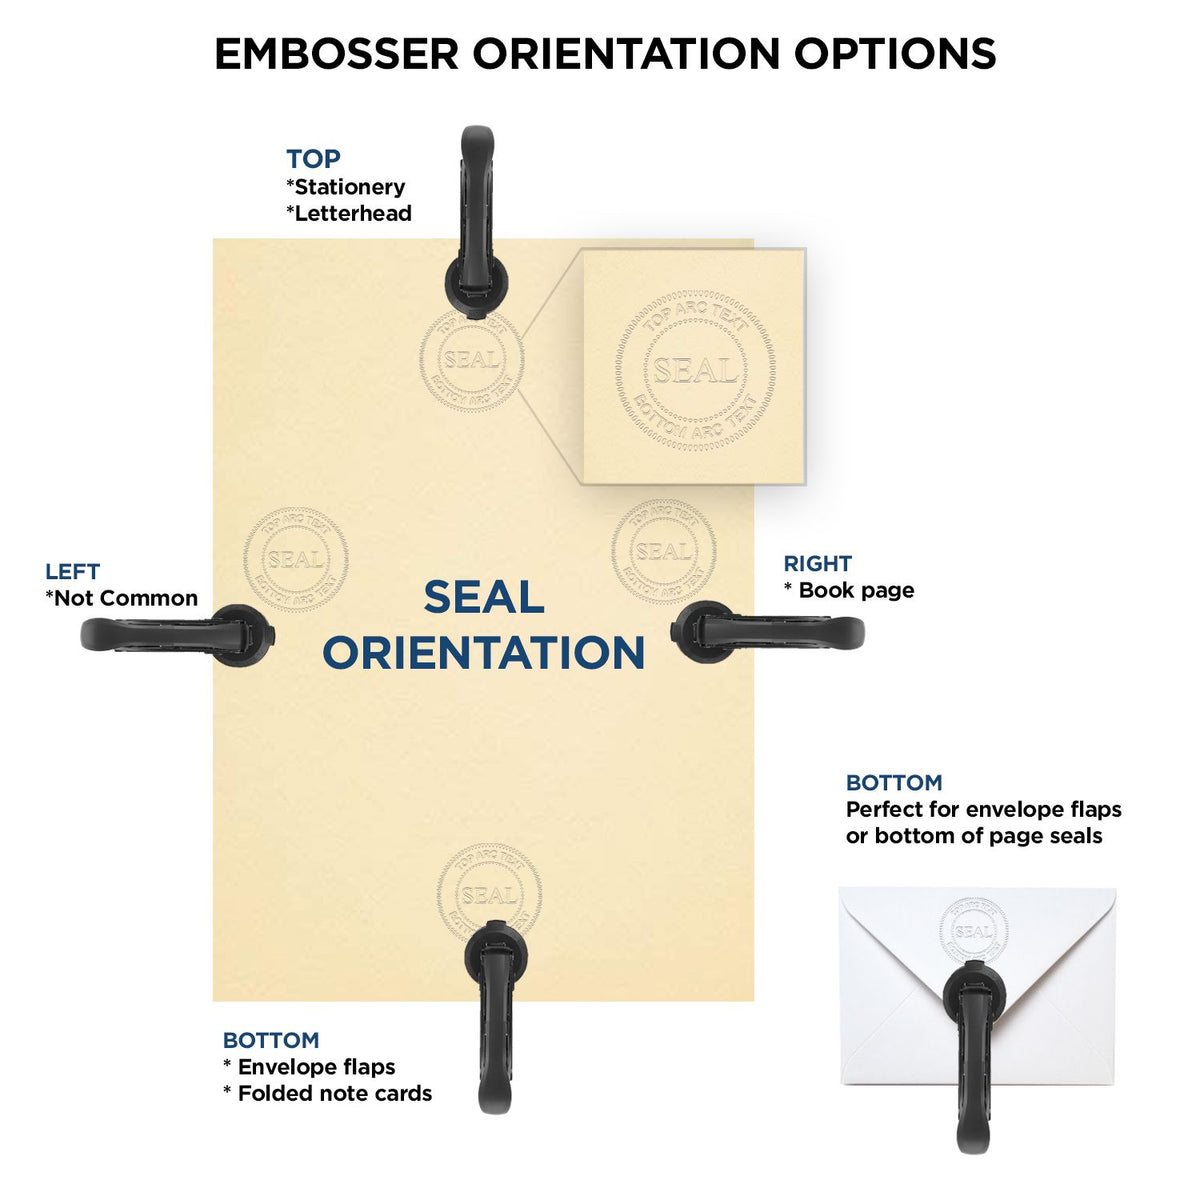 An infographic for the Heavy Duty Cast Iron Florida Geologist Seal Embosser showing embosser orientation, this is showing examples of a top, bottom, right and left insert.